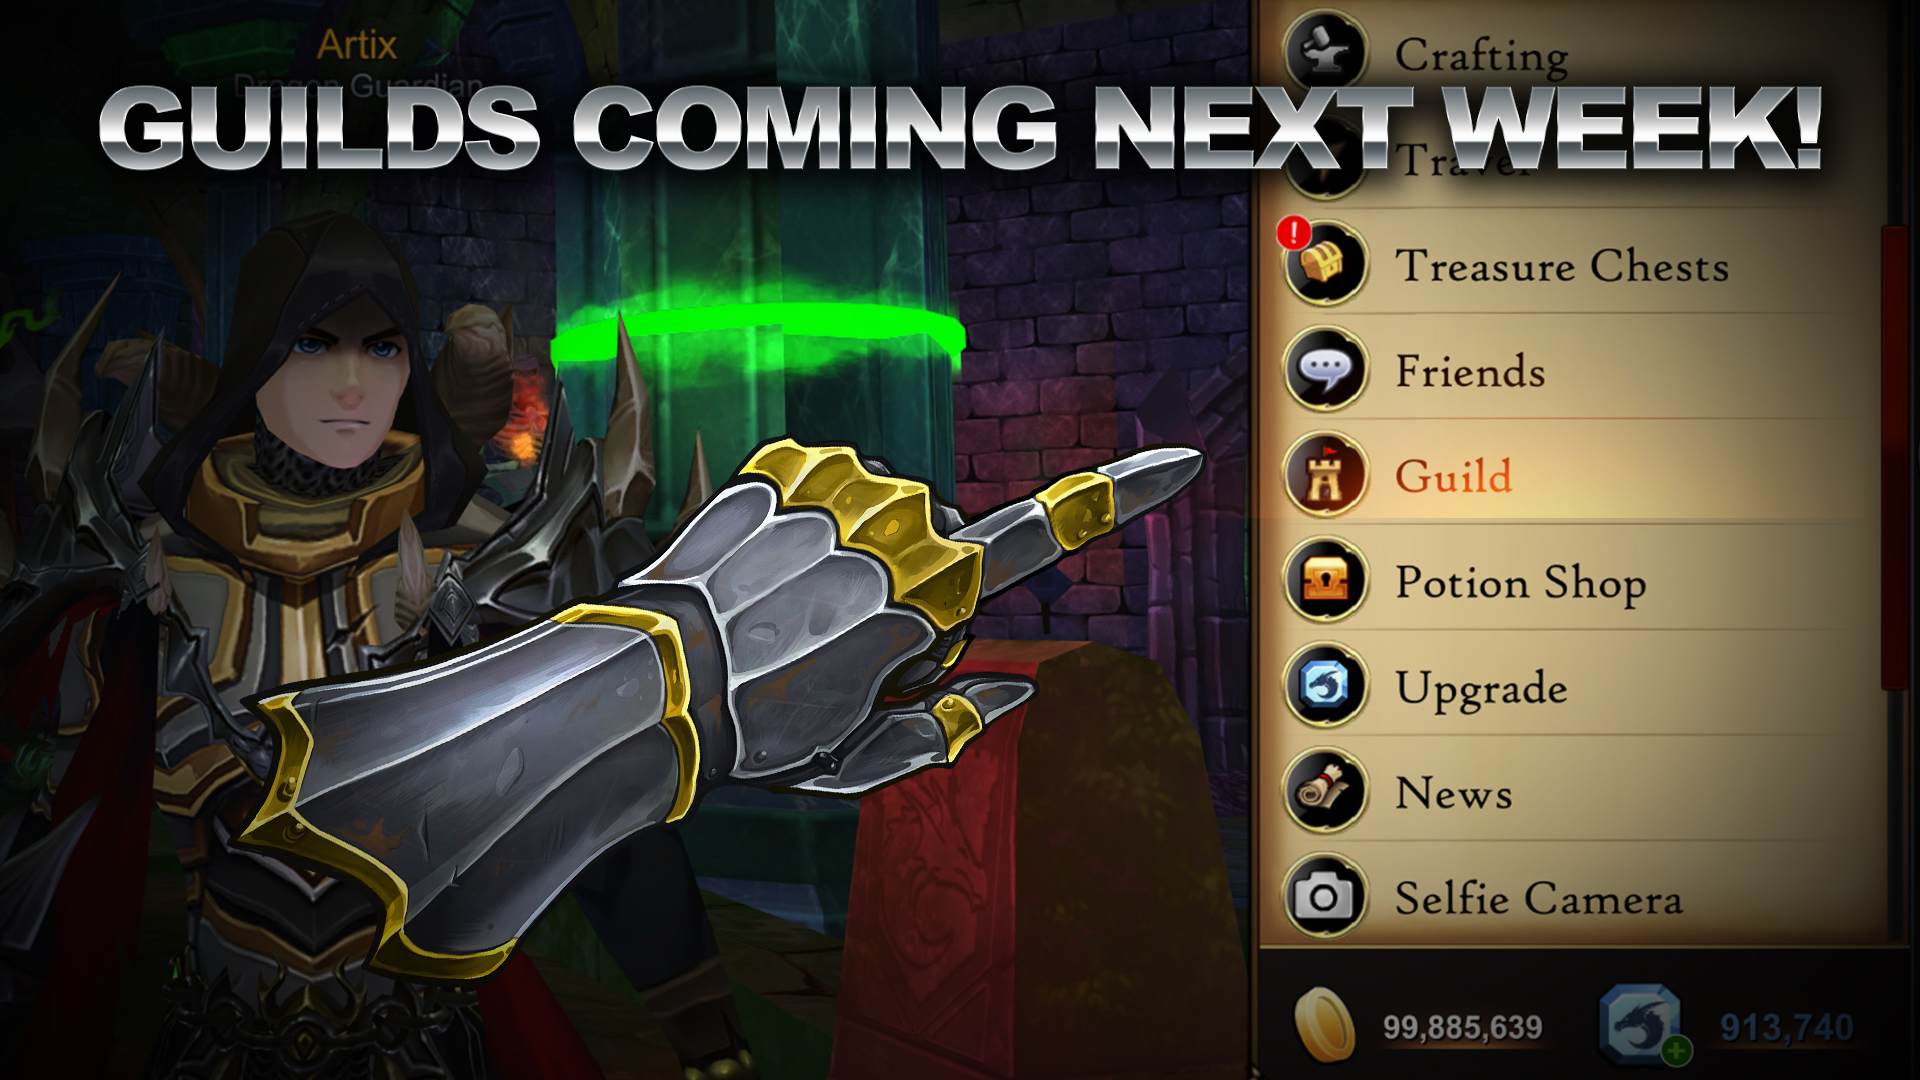 Guilds coming next week